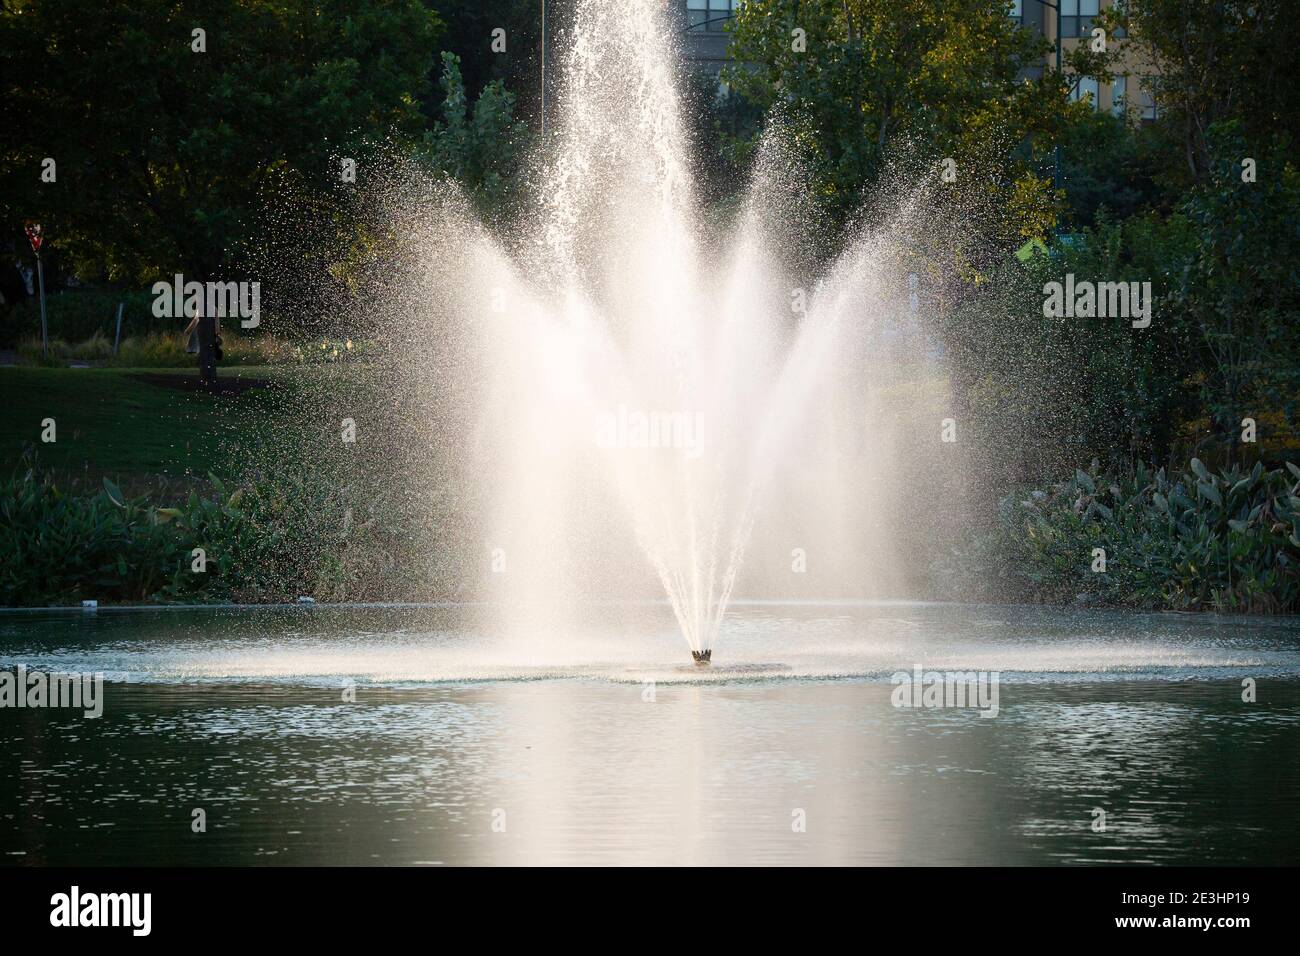 Water shooting from water fountain jets in a large water fountain Stock Photo